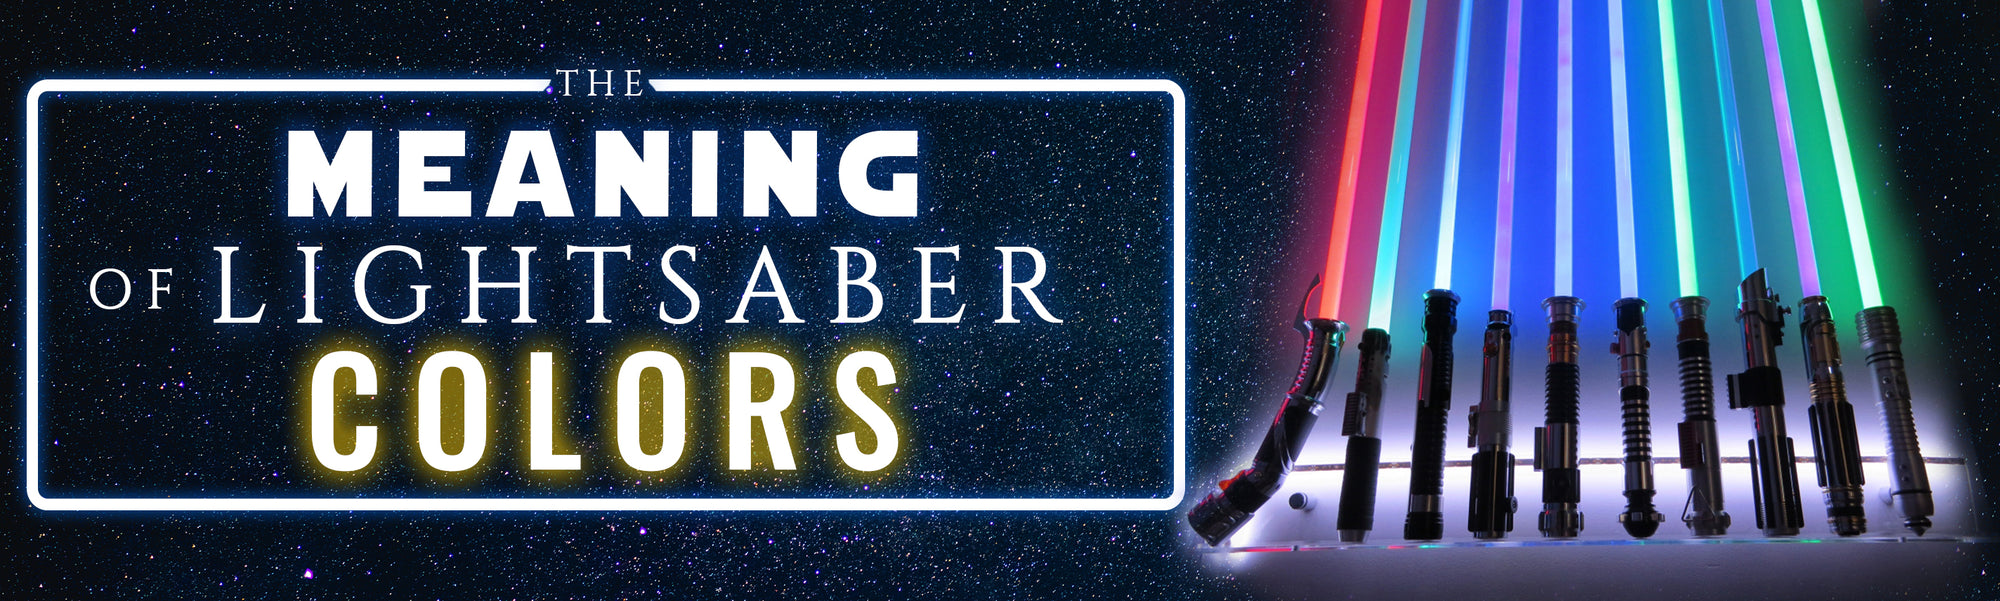 Meaning of Lightsaber Colors